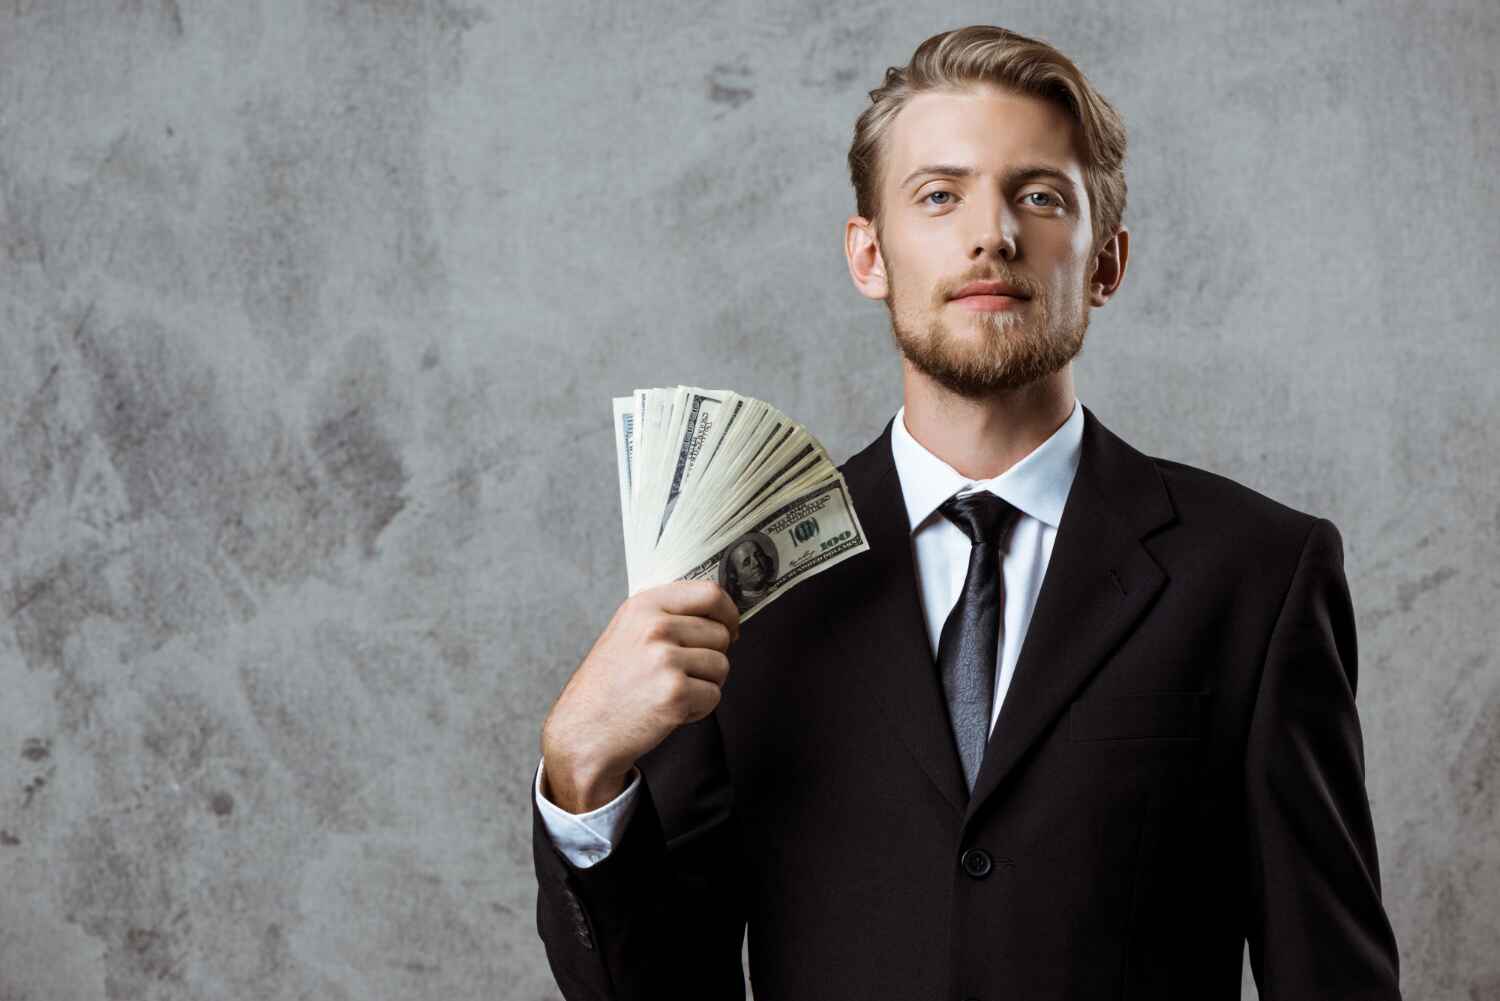 A man wearing a black suit and tie stands against a gray, textured background. He holds several fan-spread U.S. dollar bills in one hand near his face, looking directly at the camera with a neutral expression, as if contemplating ways to invest money. | MONEY6X